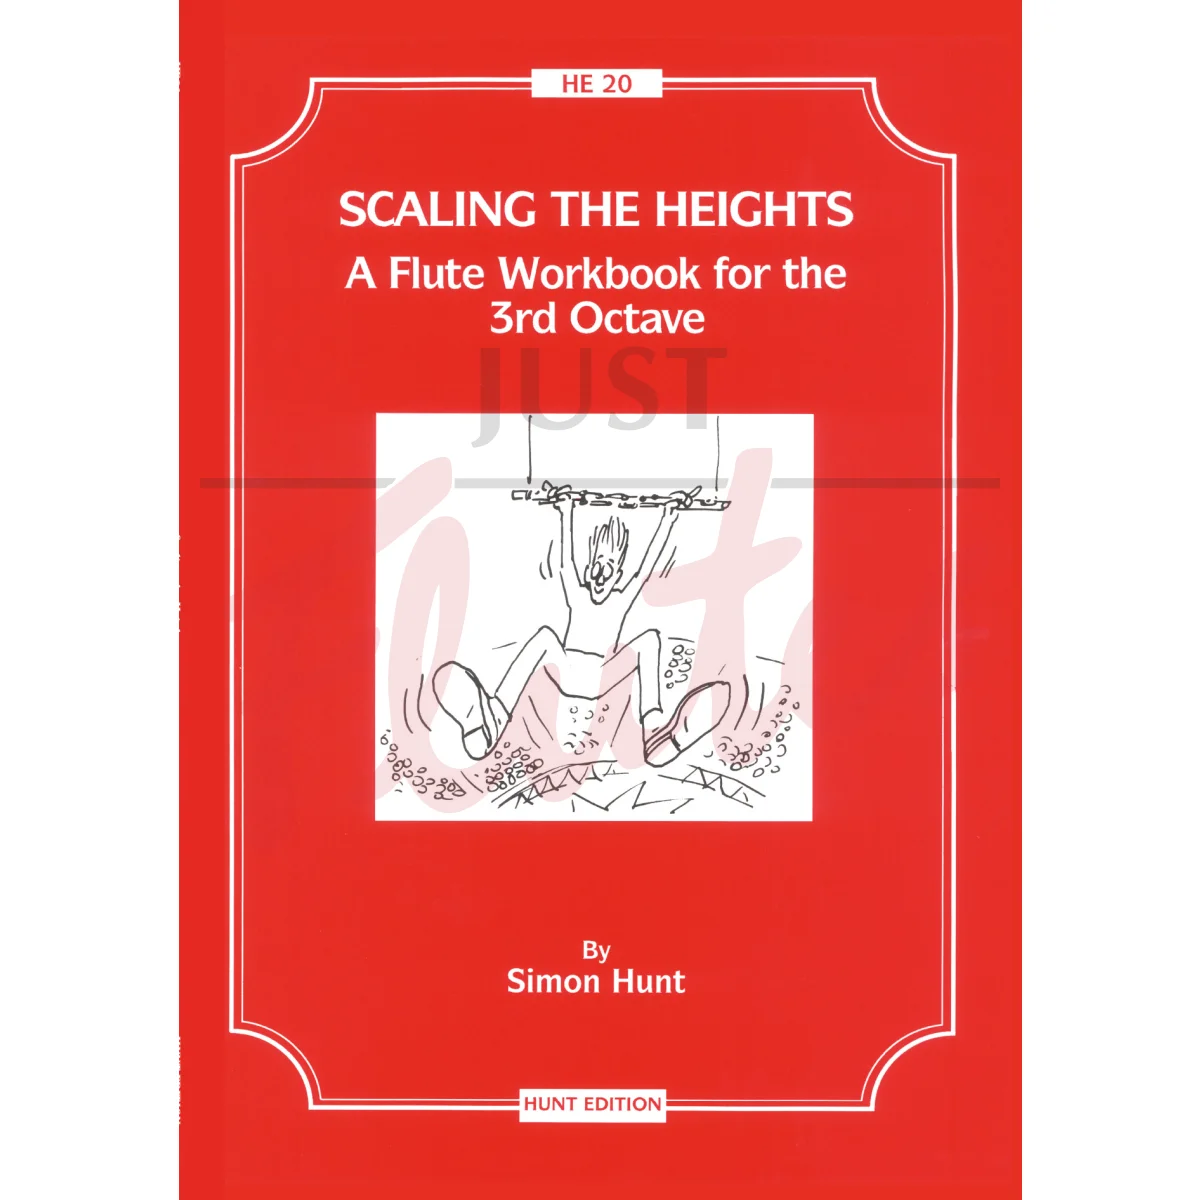 Scaling the Heights: A Flute Workbook for the 3rd Octave